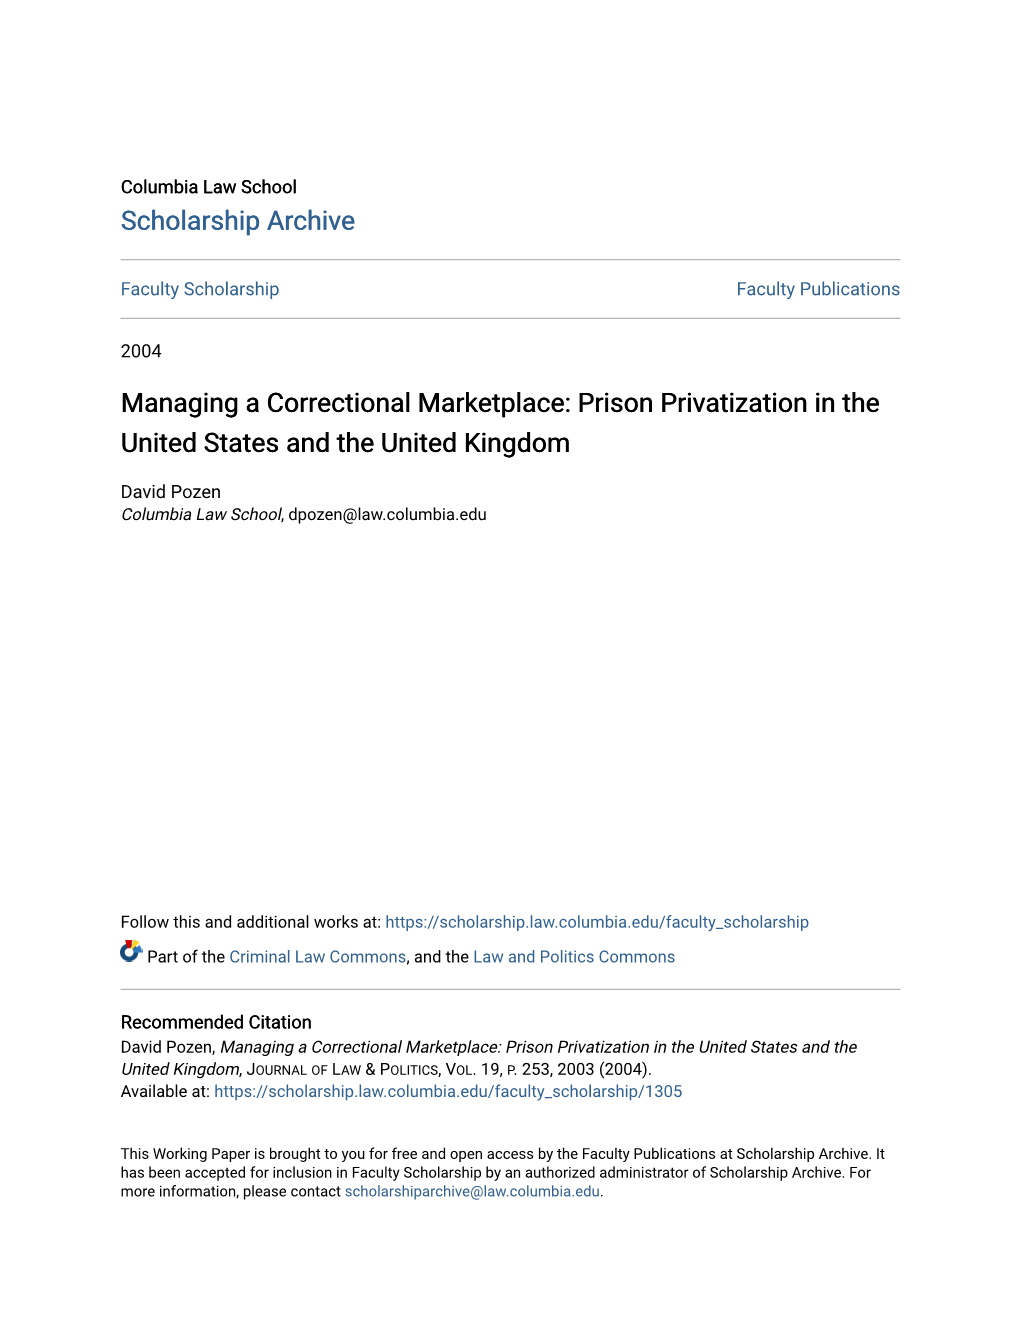 Managing a Correctional Marketplace: Prison Privatization in the United States and the United Kingdom